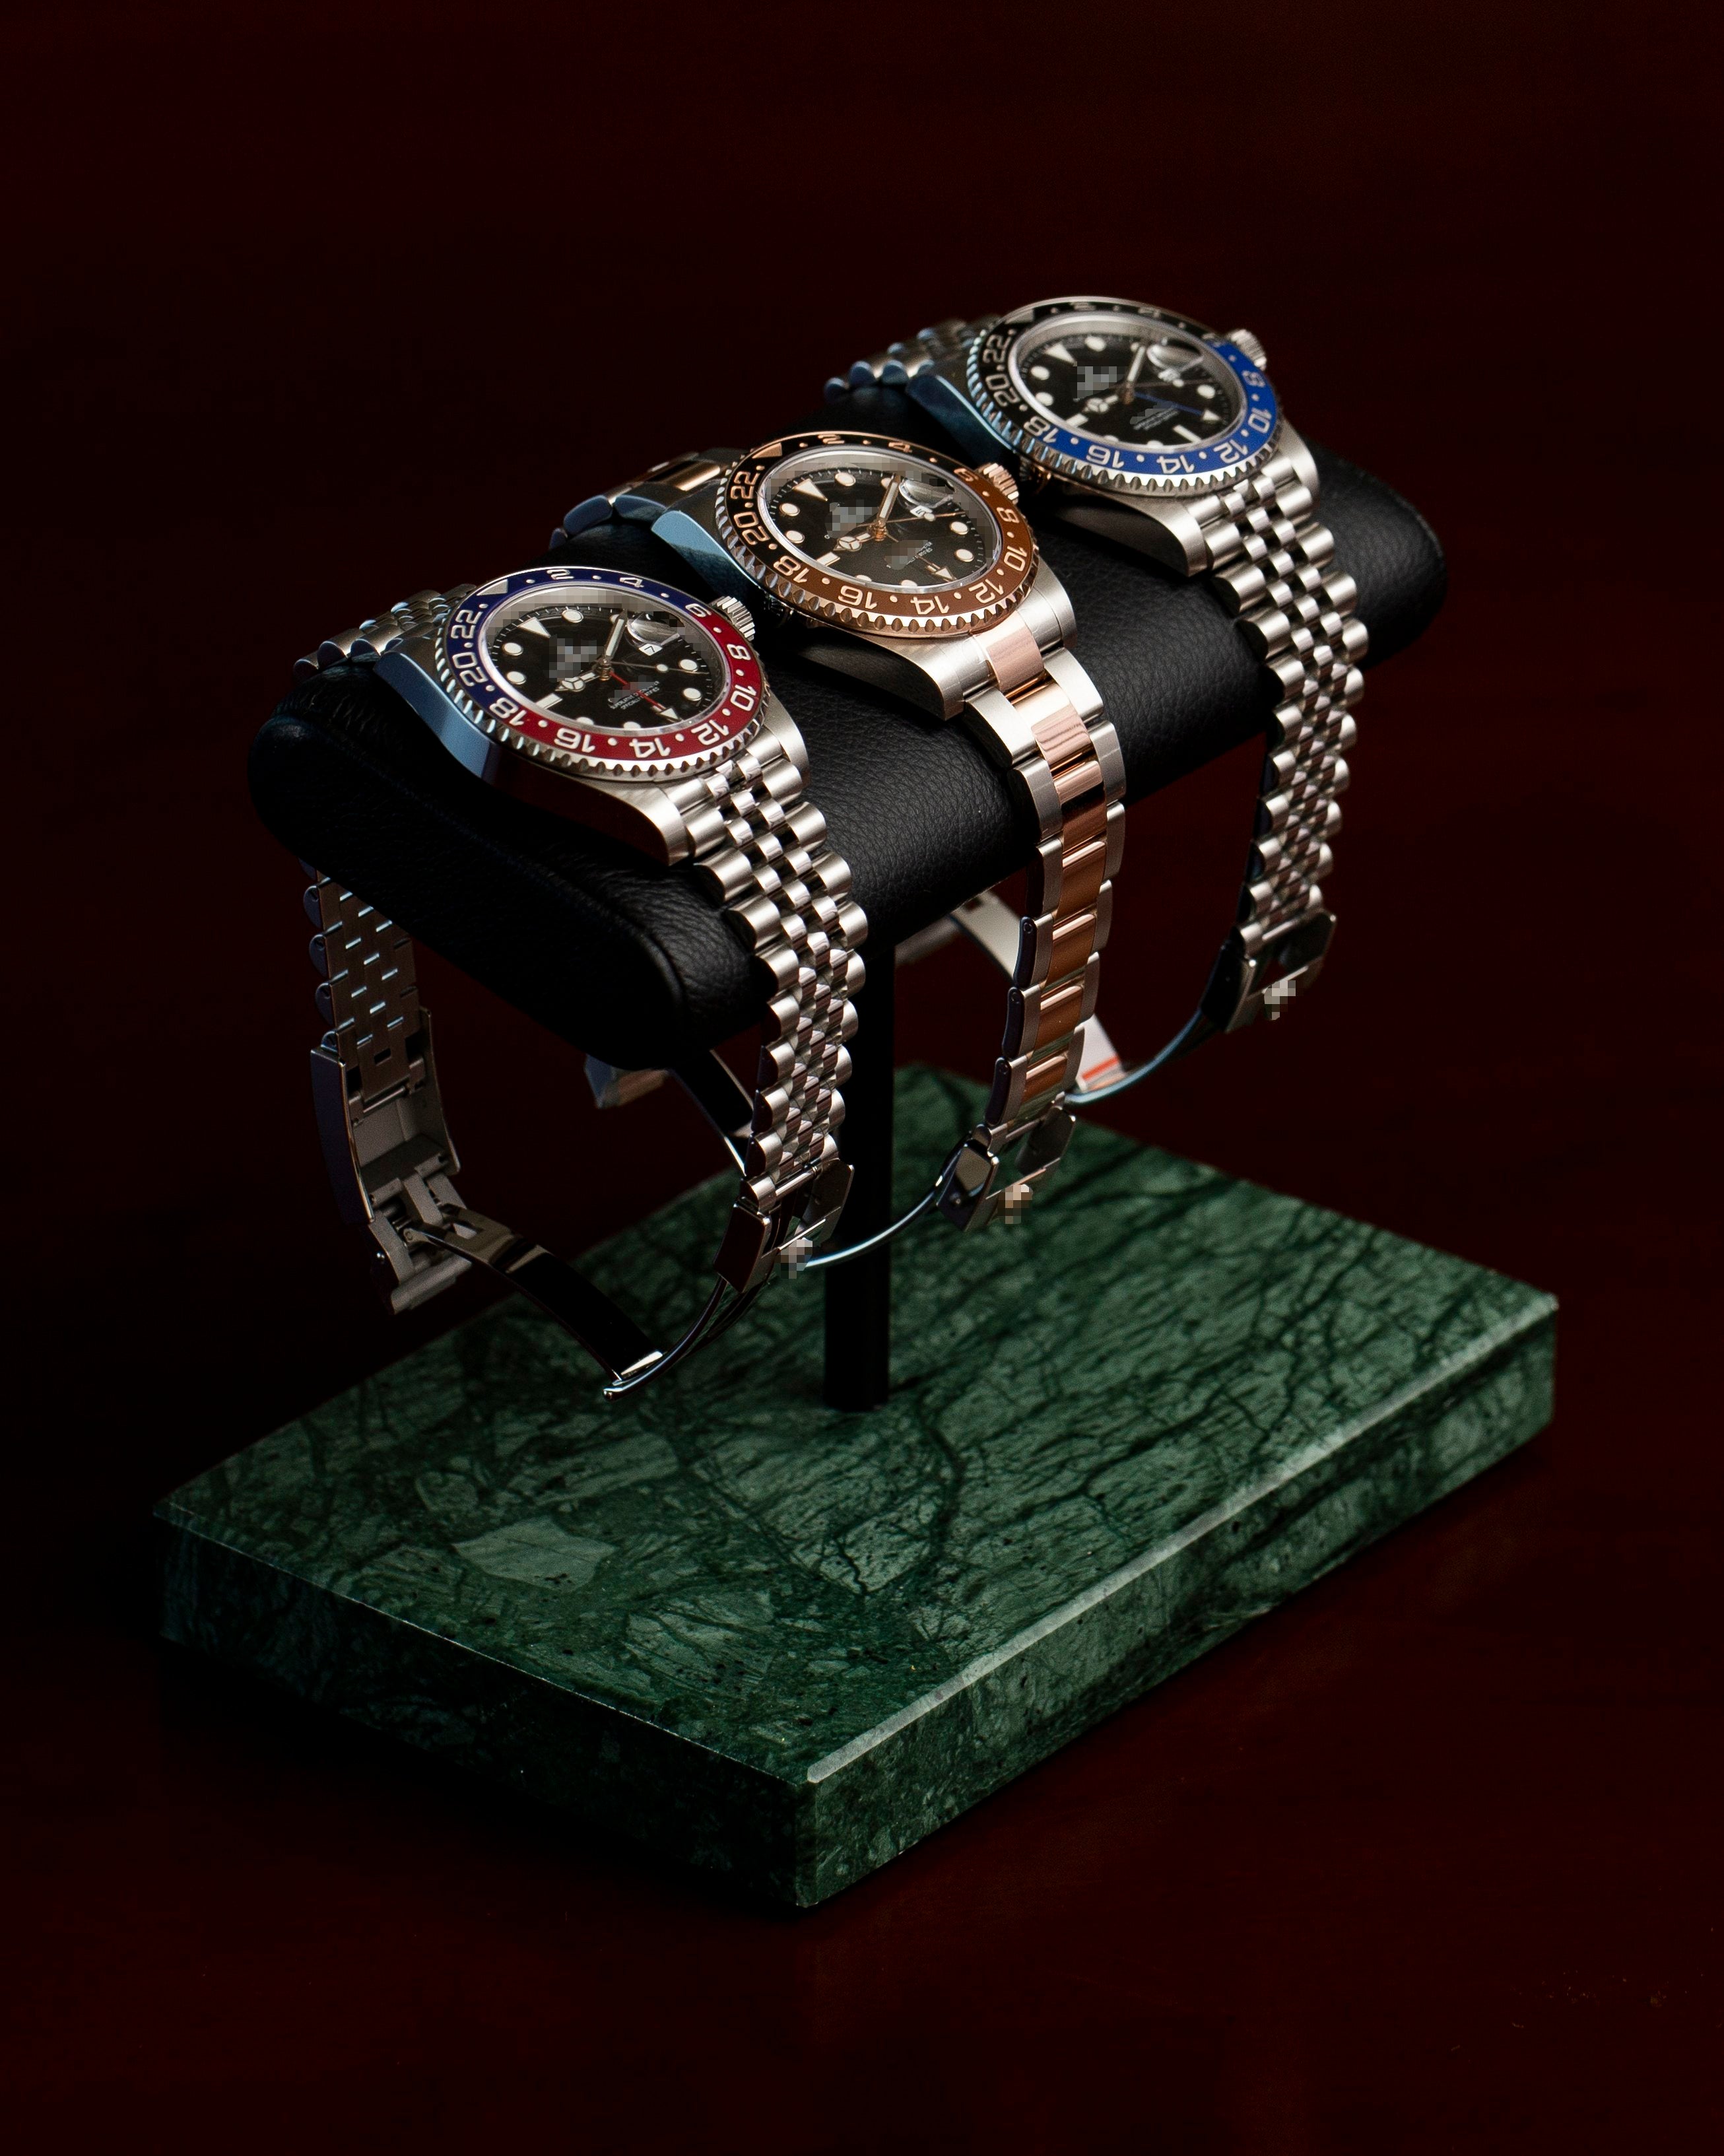 WATCH STAND CLASSIC - DOUBLE - GREEN & BLACK